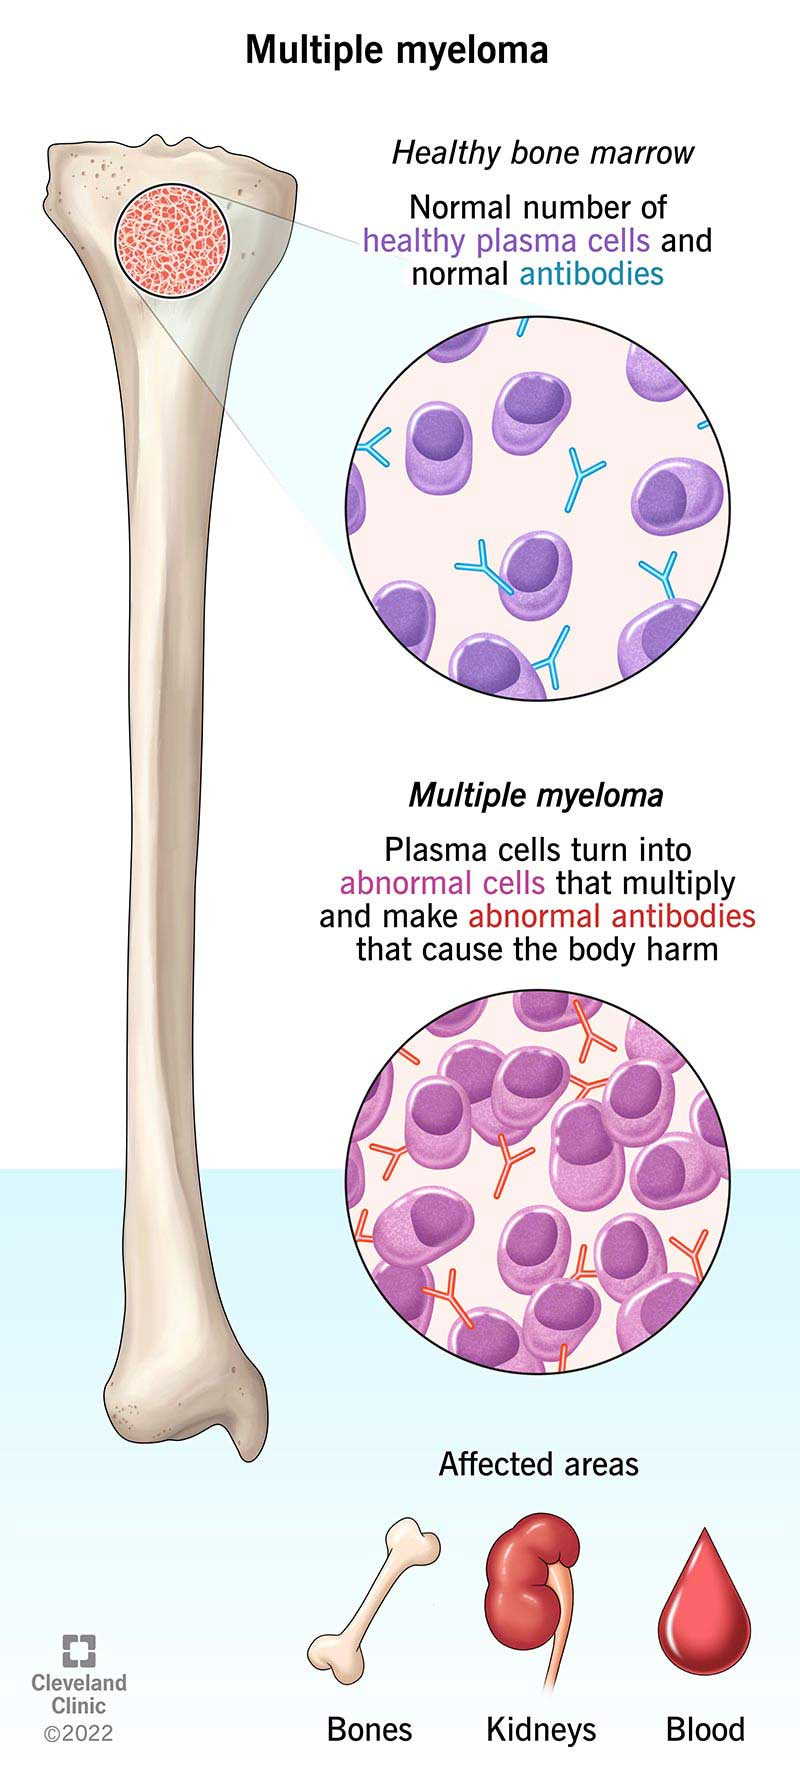 In multiple myeloma, healthy plasma cells that create infection-fighting antibodies become abnormal cells that multiply, damaging blood, bone and tissue. The abnormal plasma cells also create abnormal antibodies, called M proteins, that can cause heart and kidney issues.